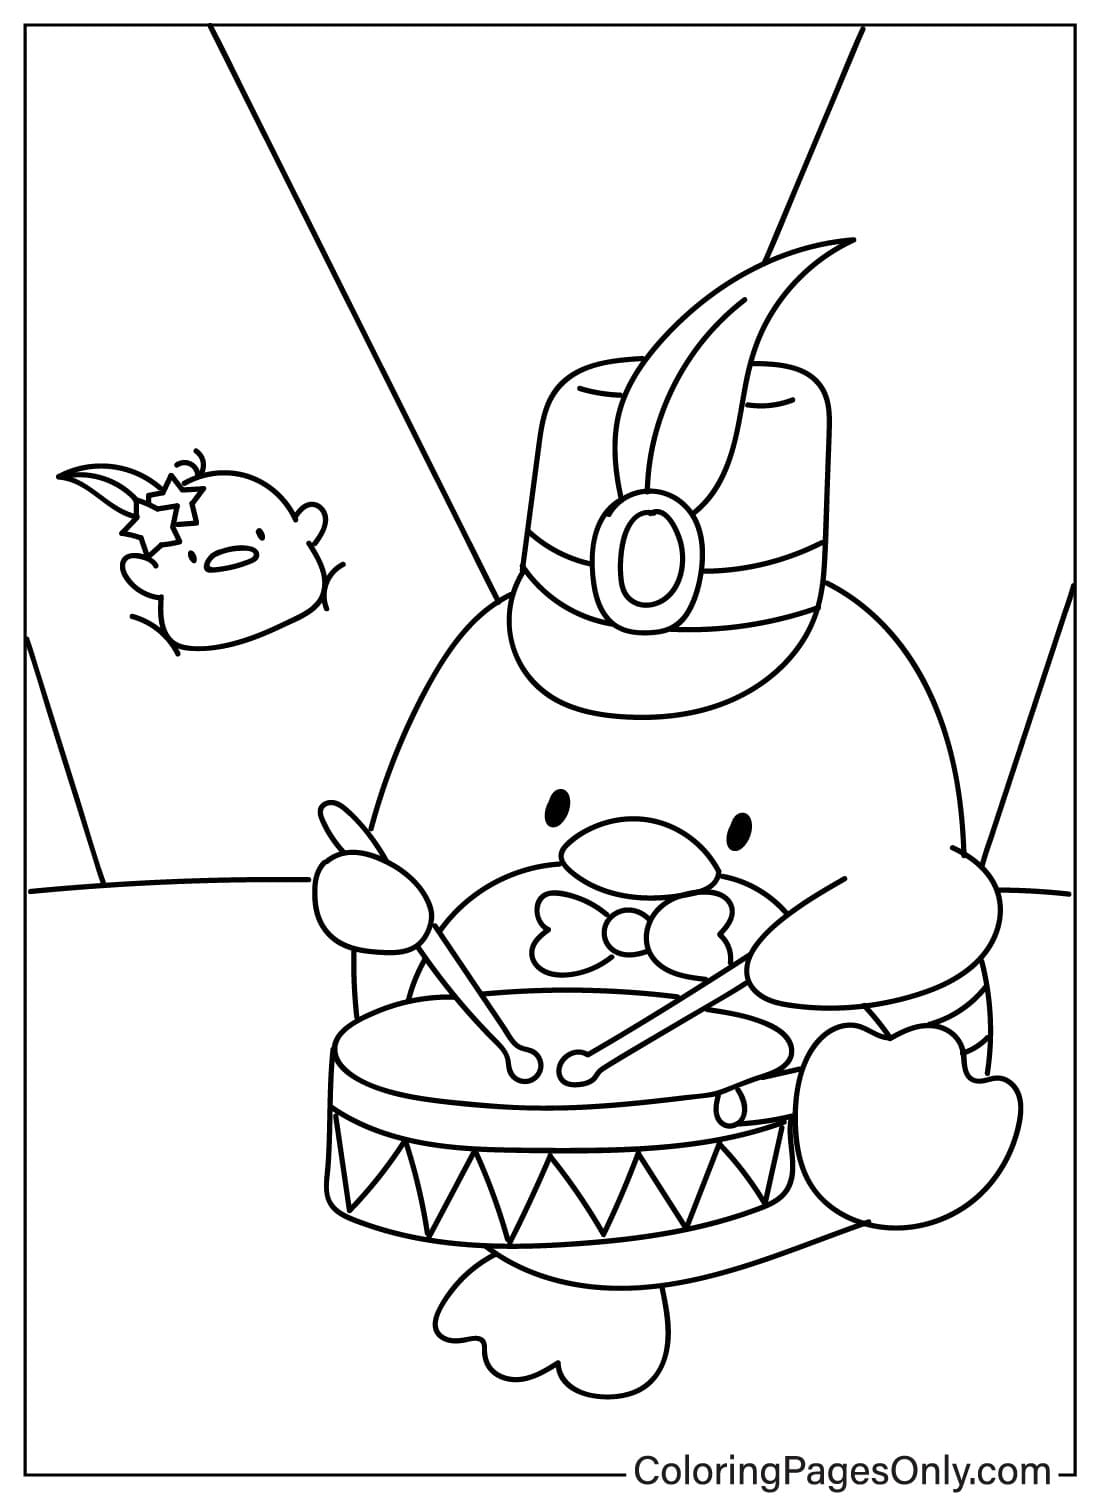 Free Tuxedo Sam Coloring Page